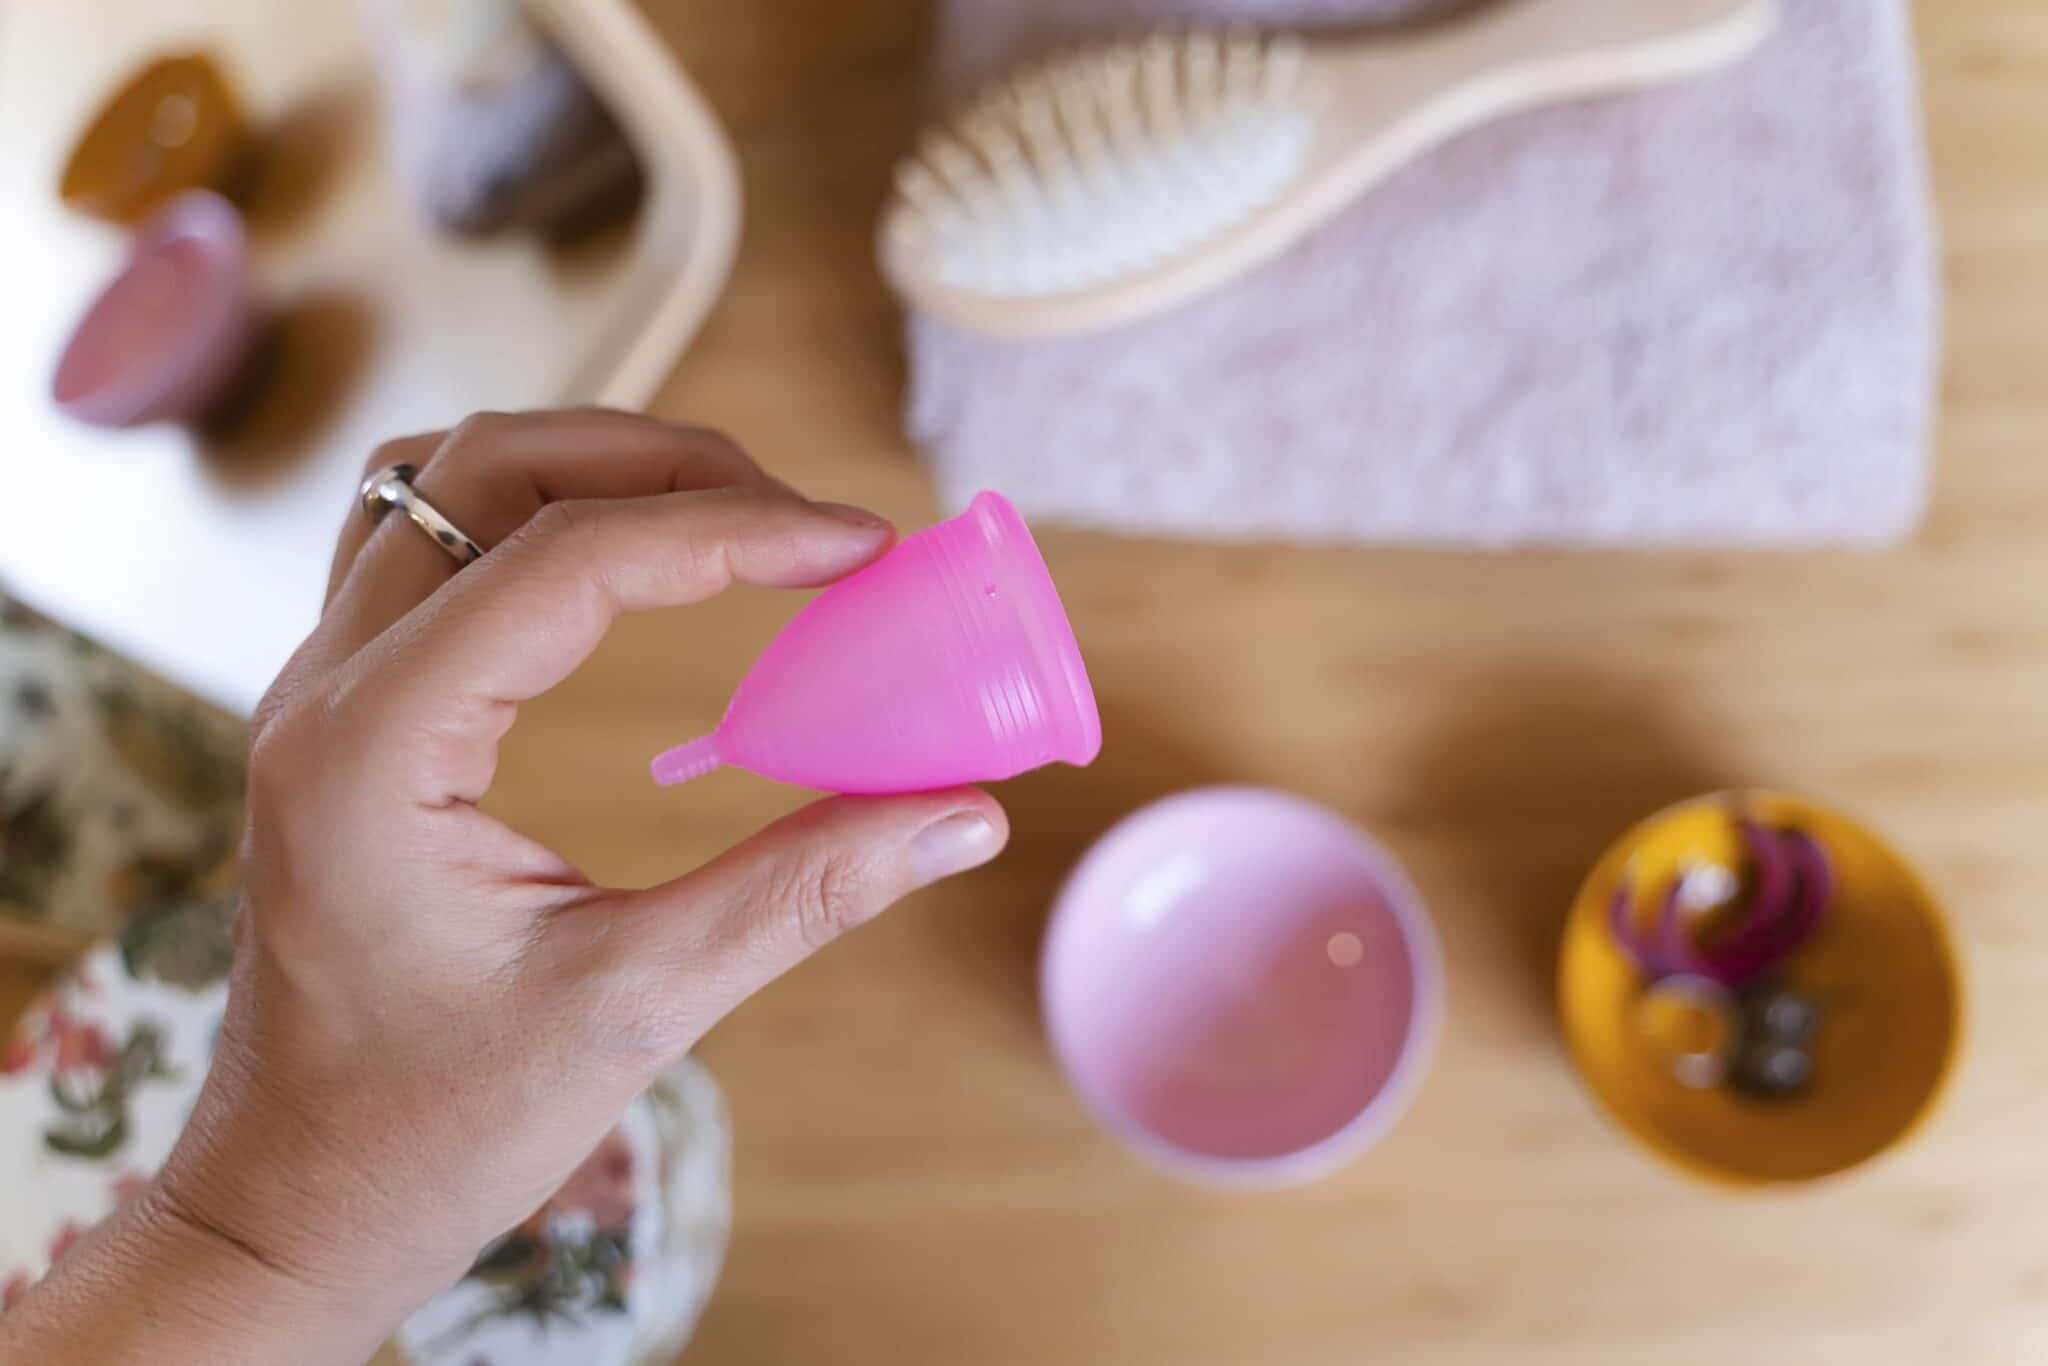 Woman holding a menstrual cup